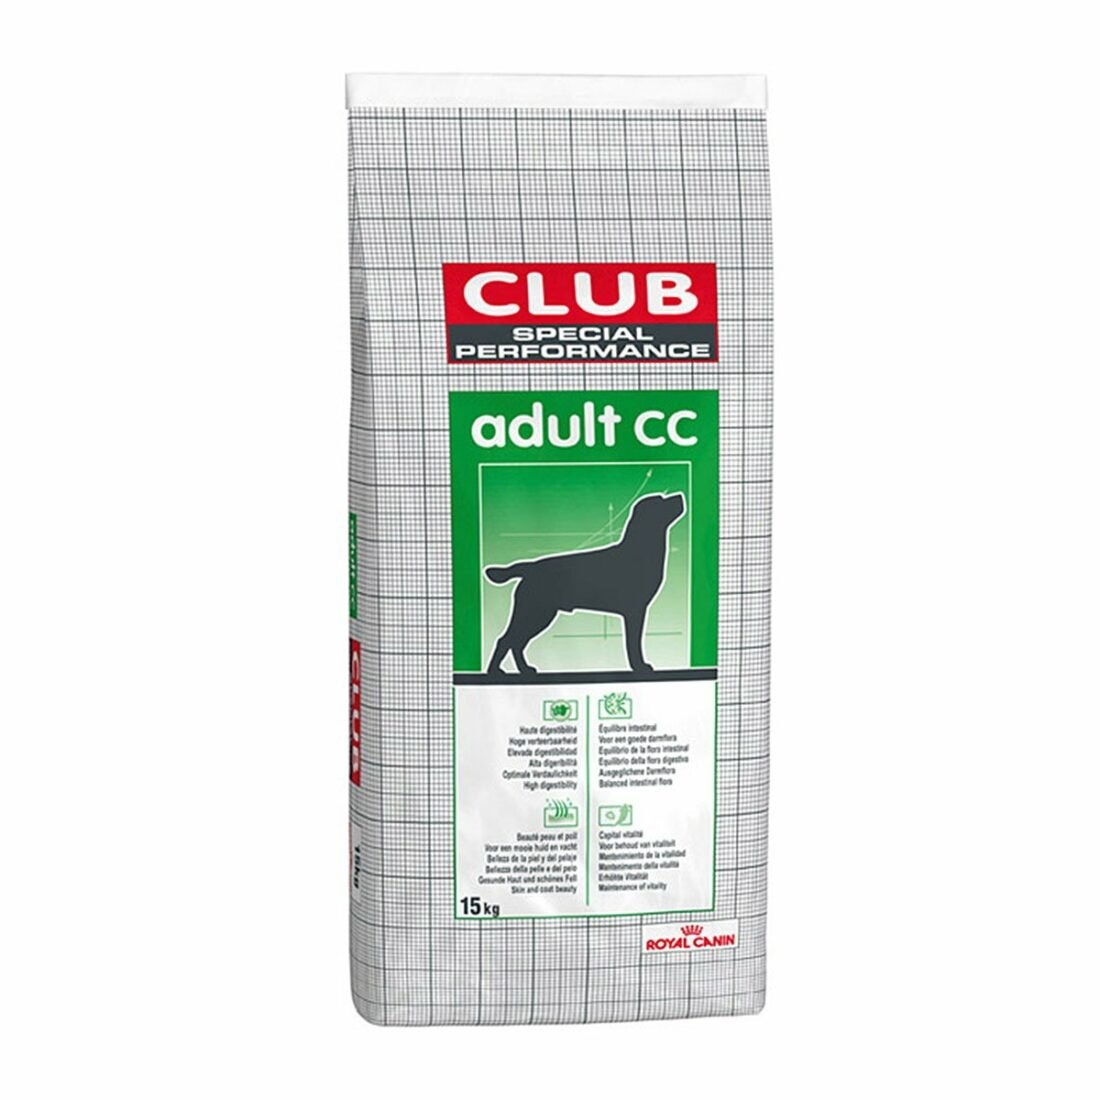 Royal Canin Special Club Performance Adult